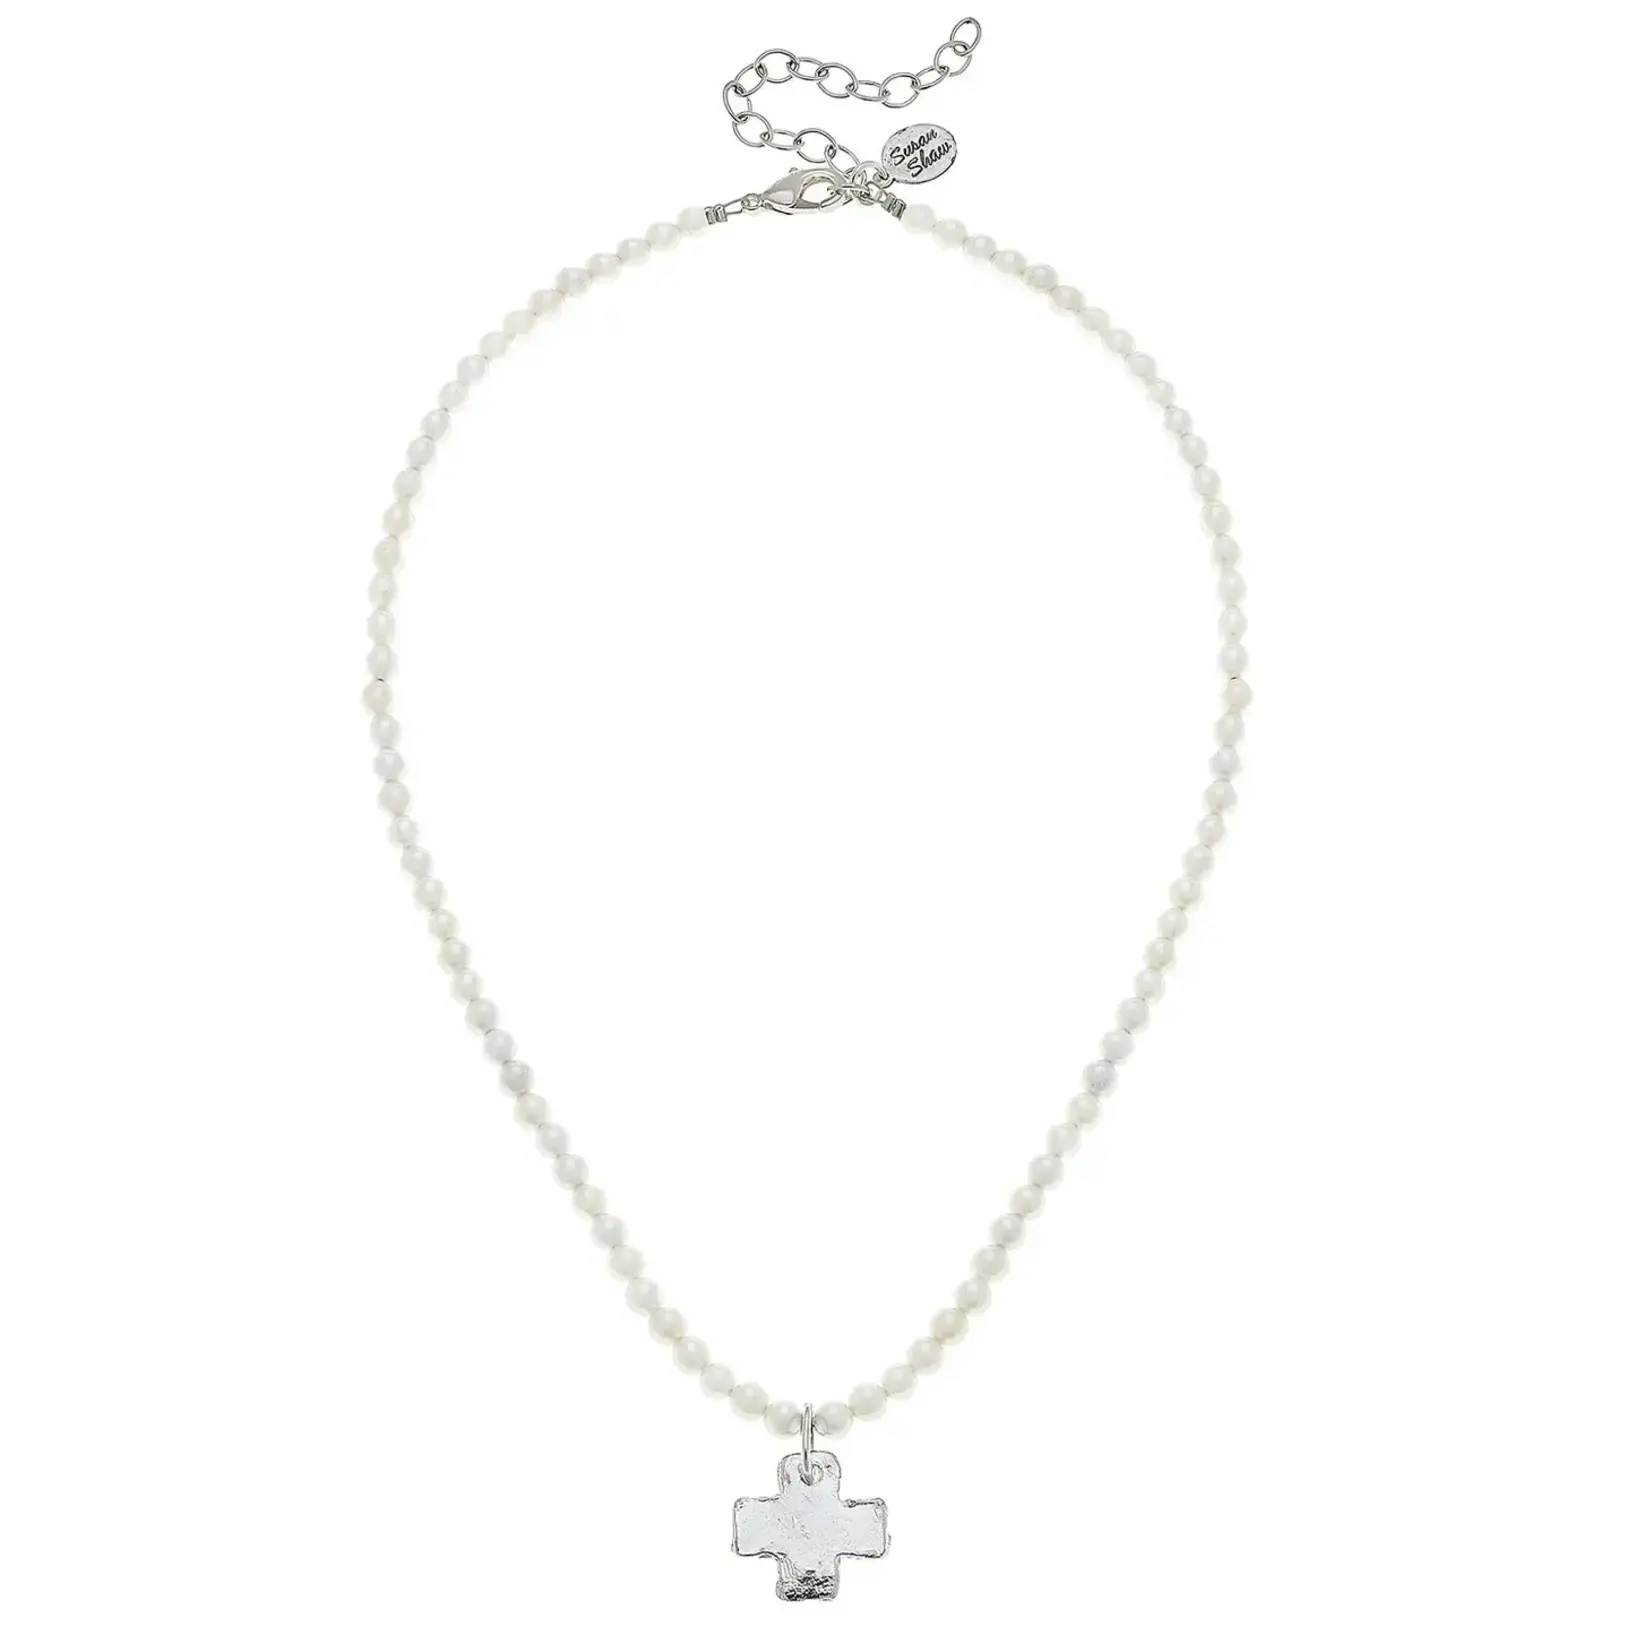 Susan Shaw Silver Cross on Ivory Beaded Necklace